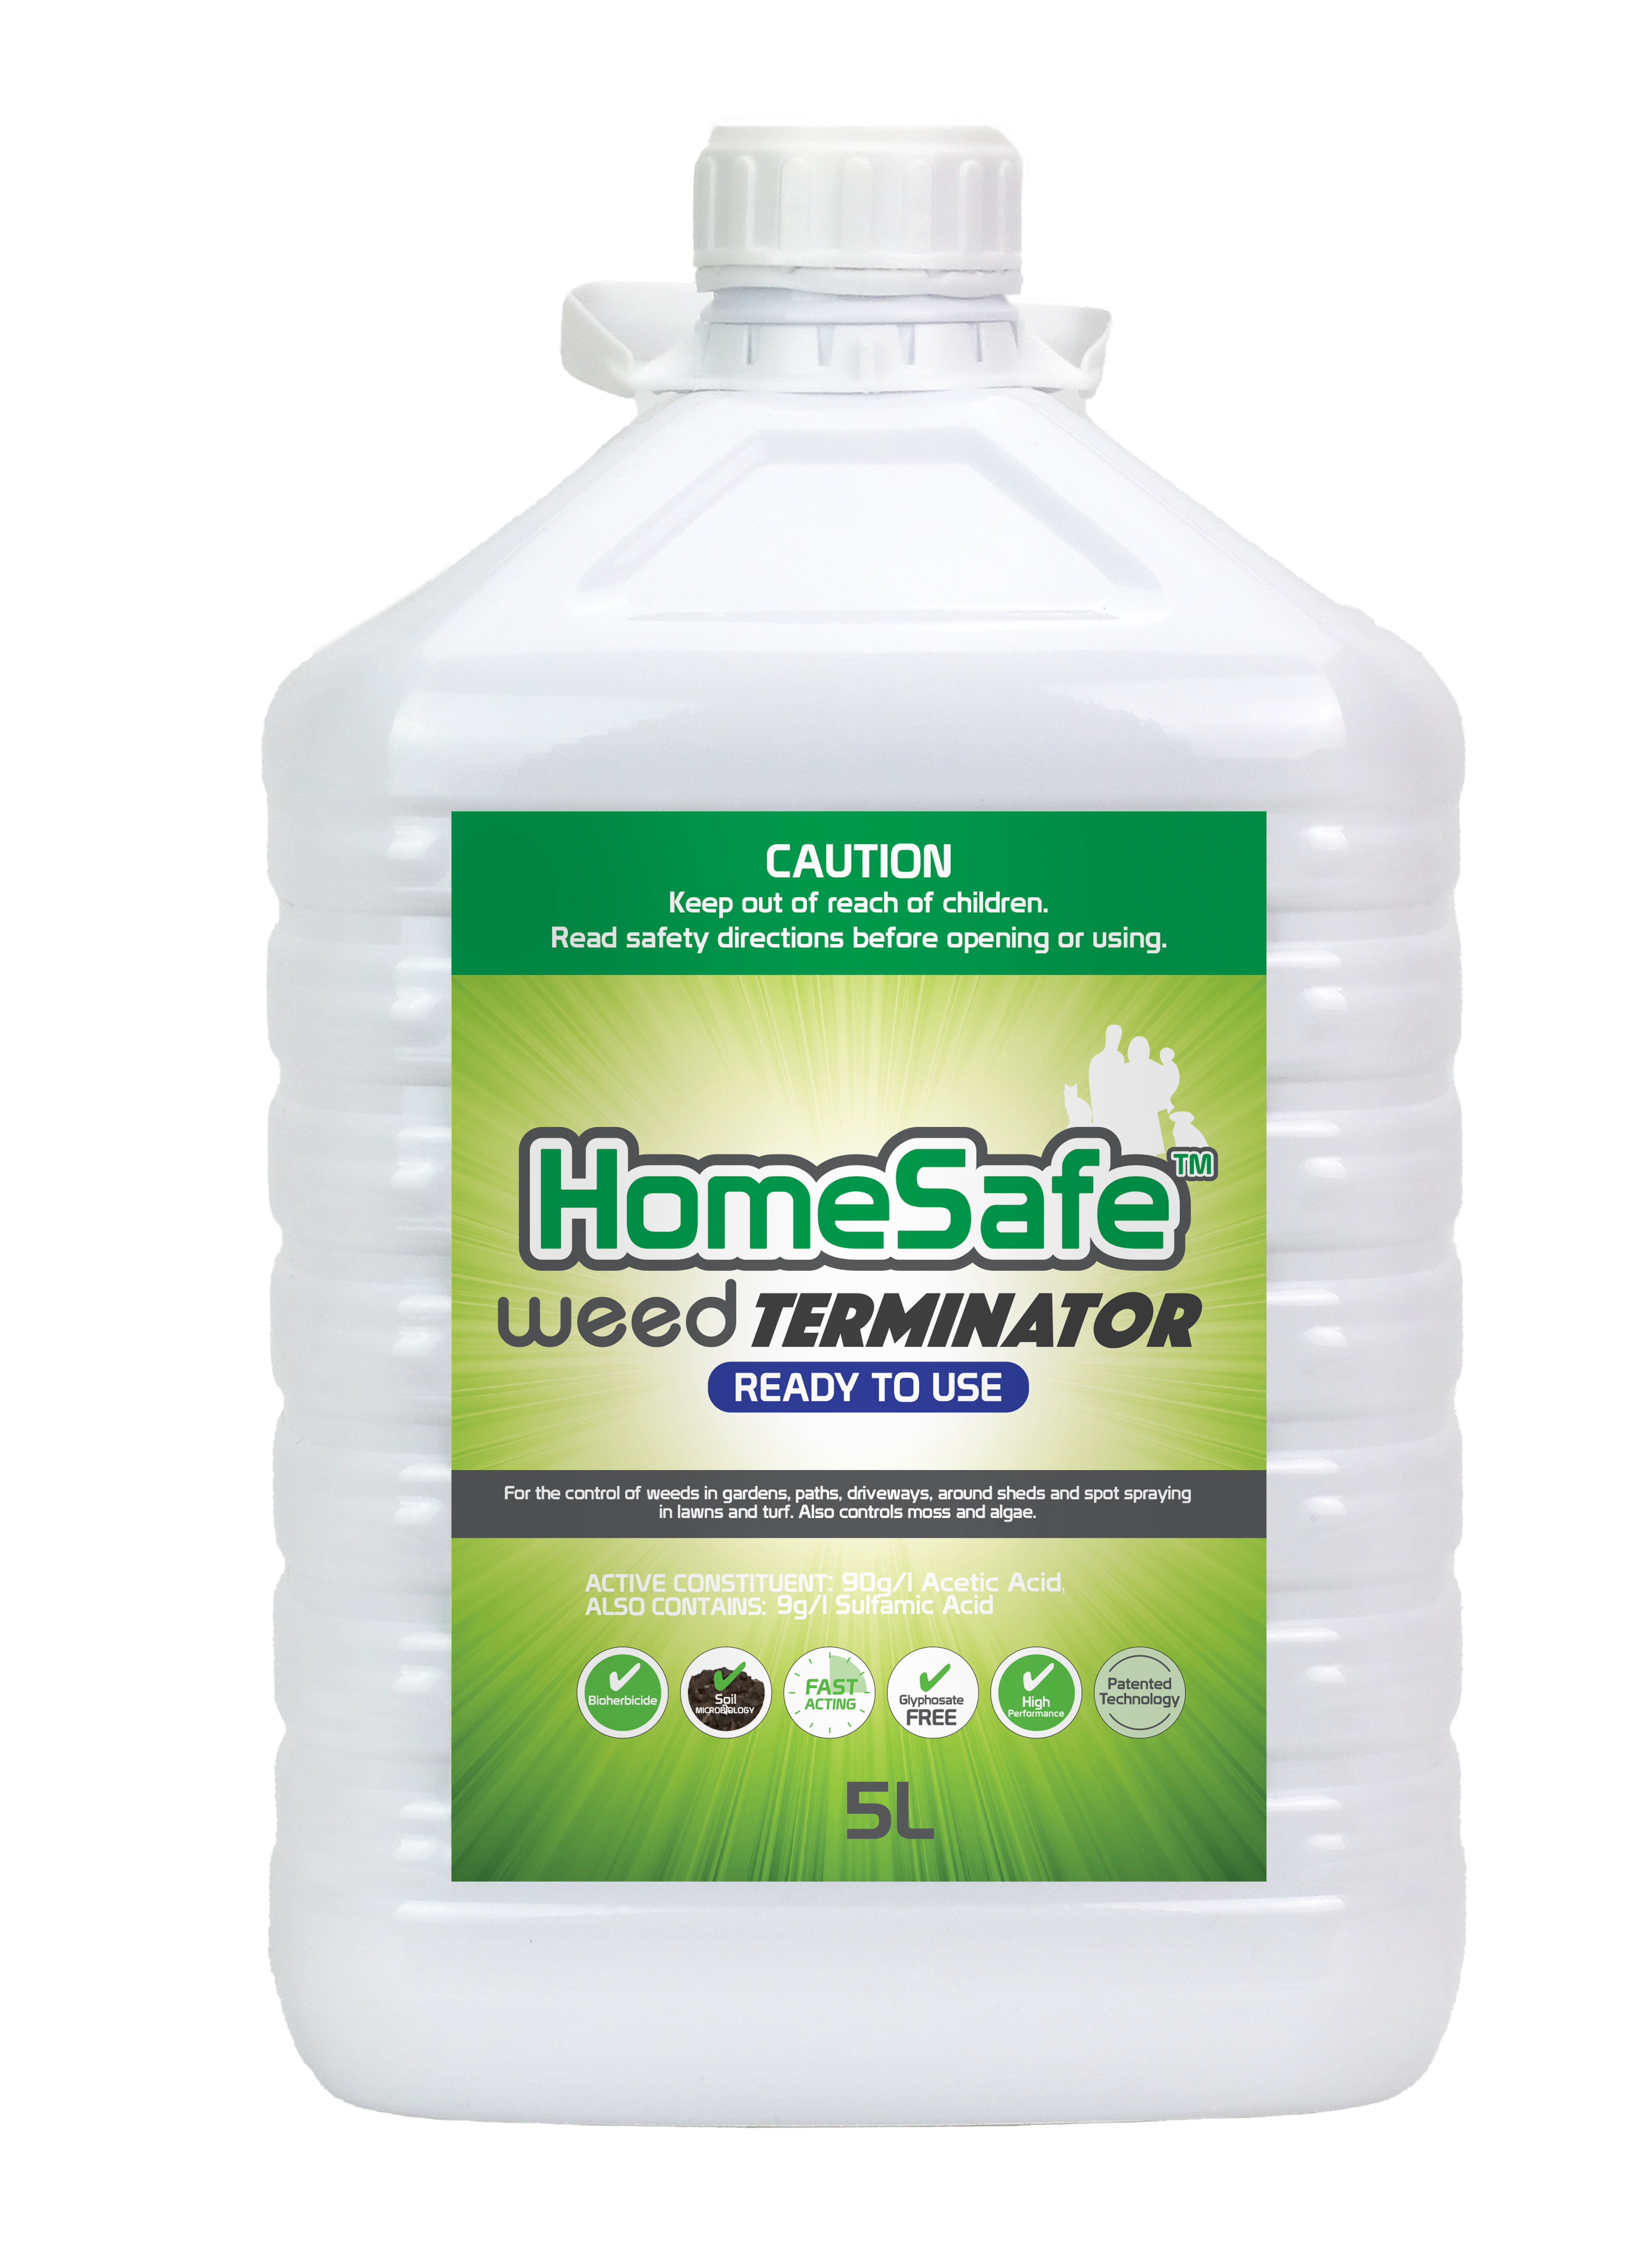 Pet Friendly Weed Killer - Ideal for Home Use | Contact Organics